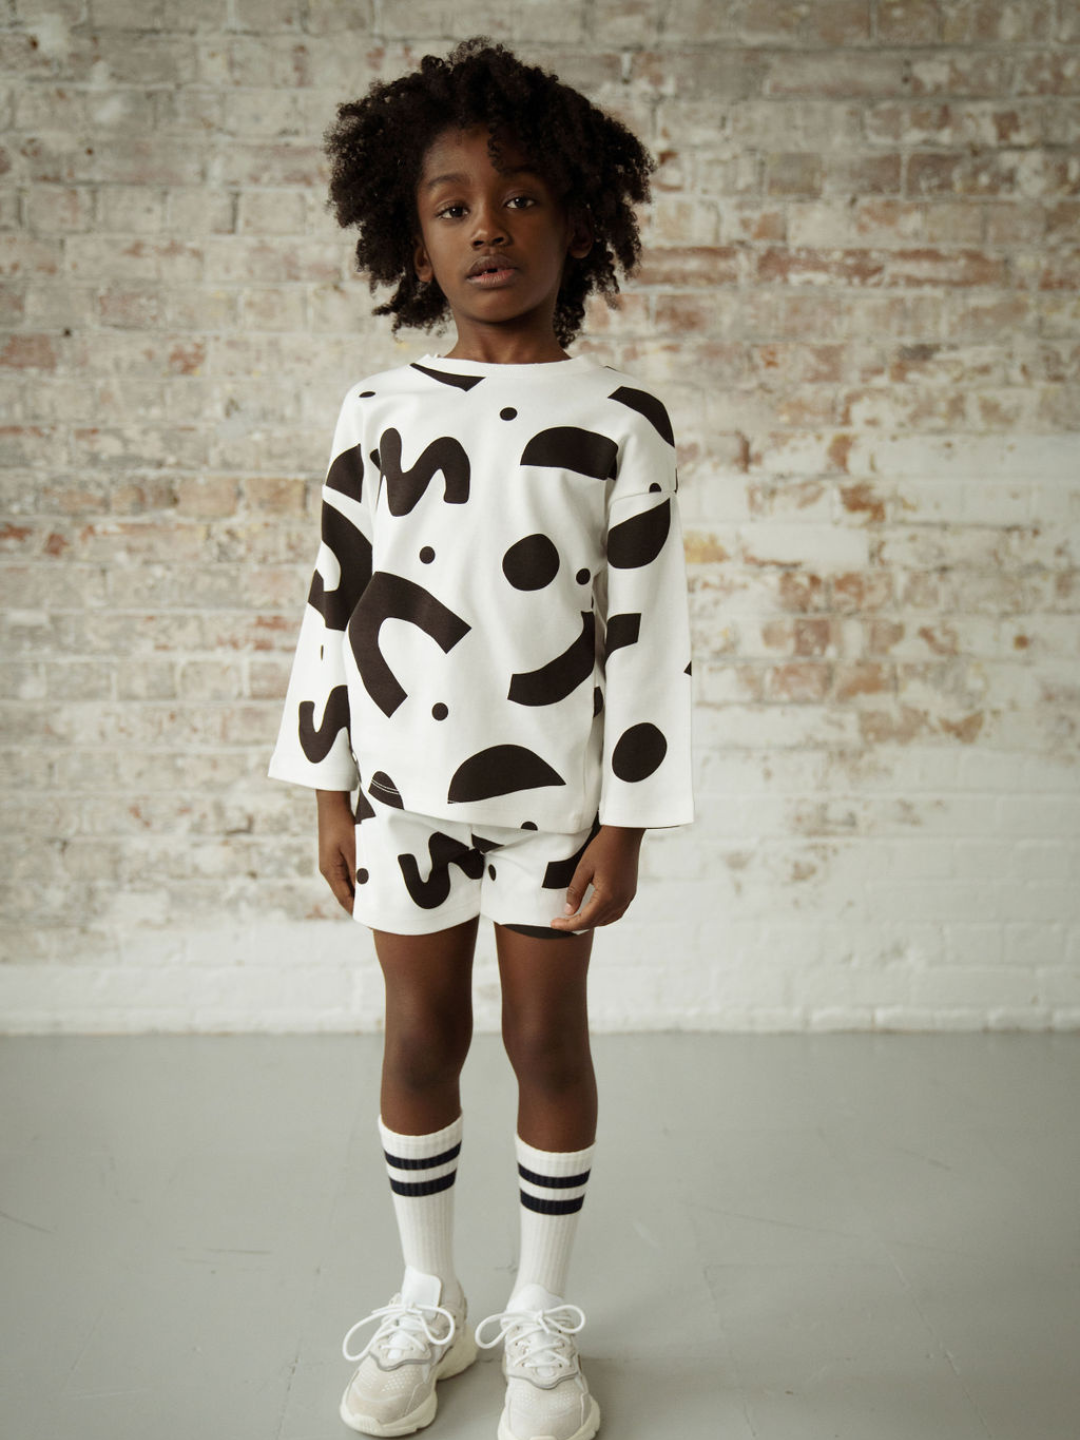 A child wearing a kids' long-sleeved tee shirt in a pattern of black squiggles and dots on a white background, with matching shorts